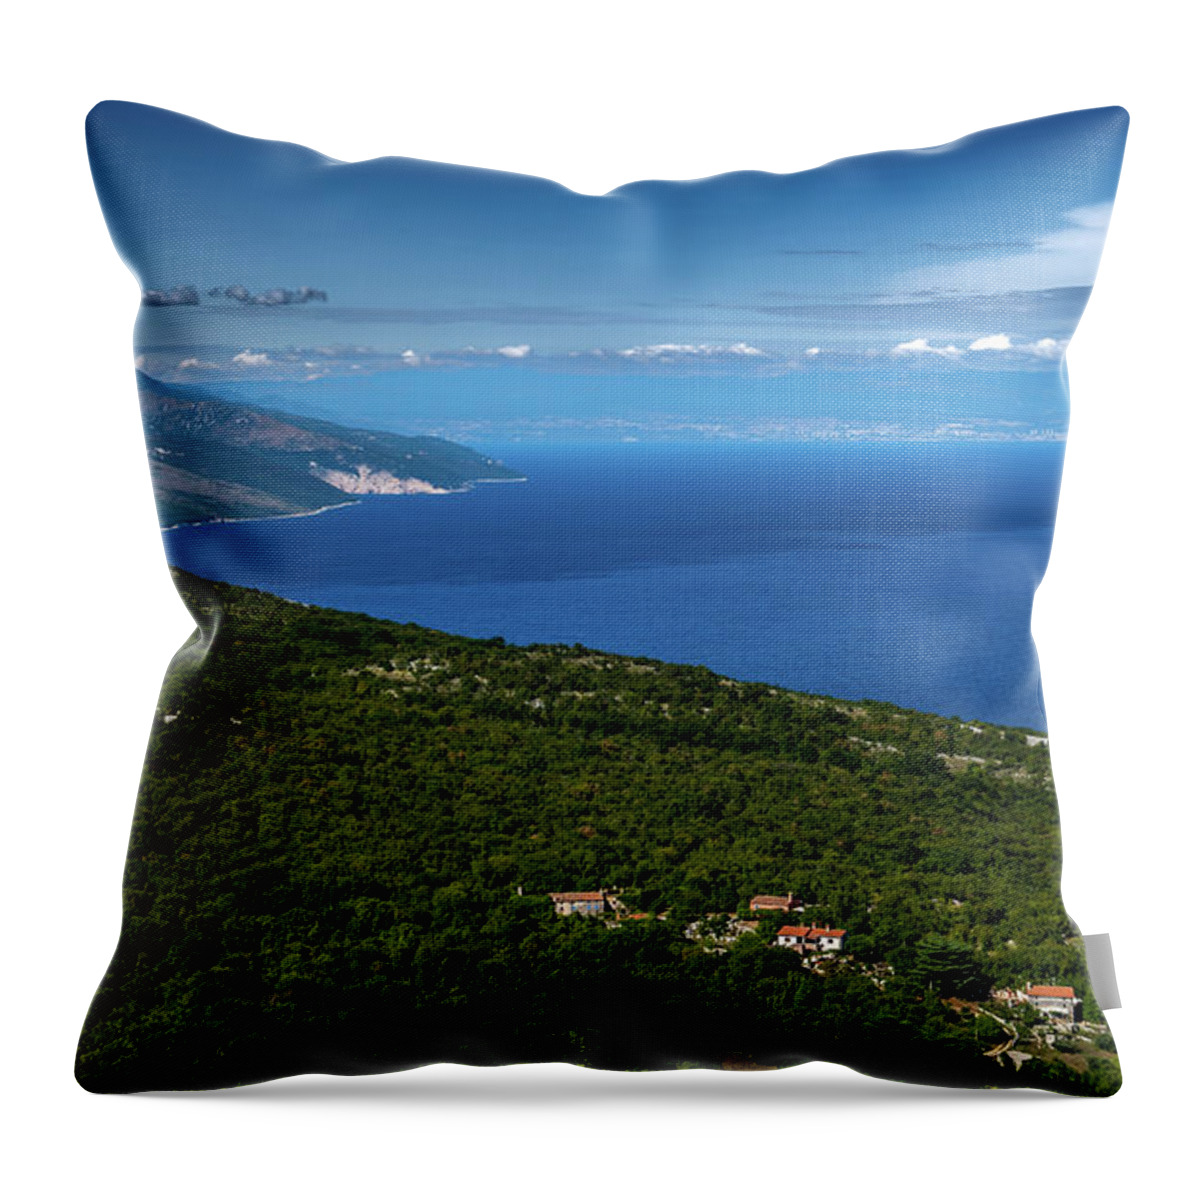 Croatia Throw Pillow featuring the photograph Remote Village Near The City Of Rabac At The Cost Of The Mediterranean Sea In Istria In Croatia by Andreas Berthold